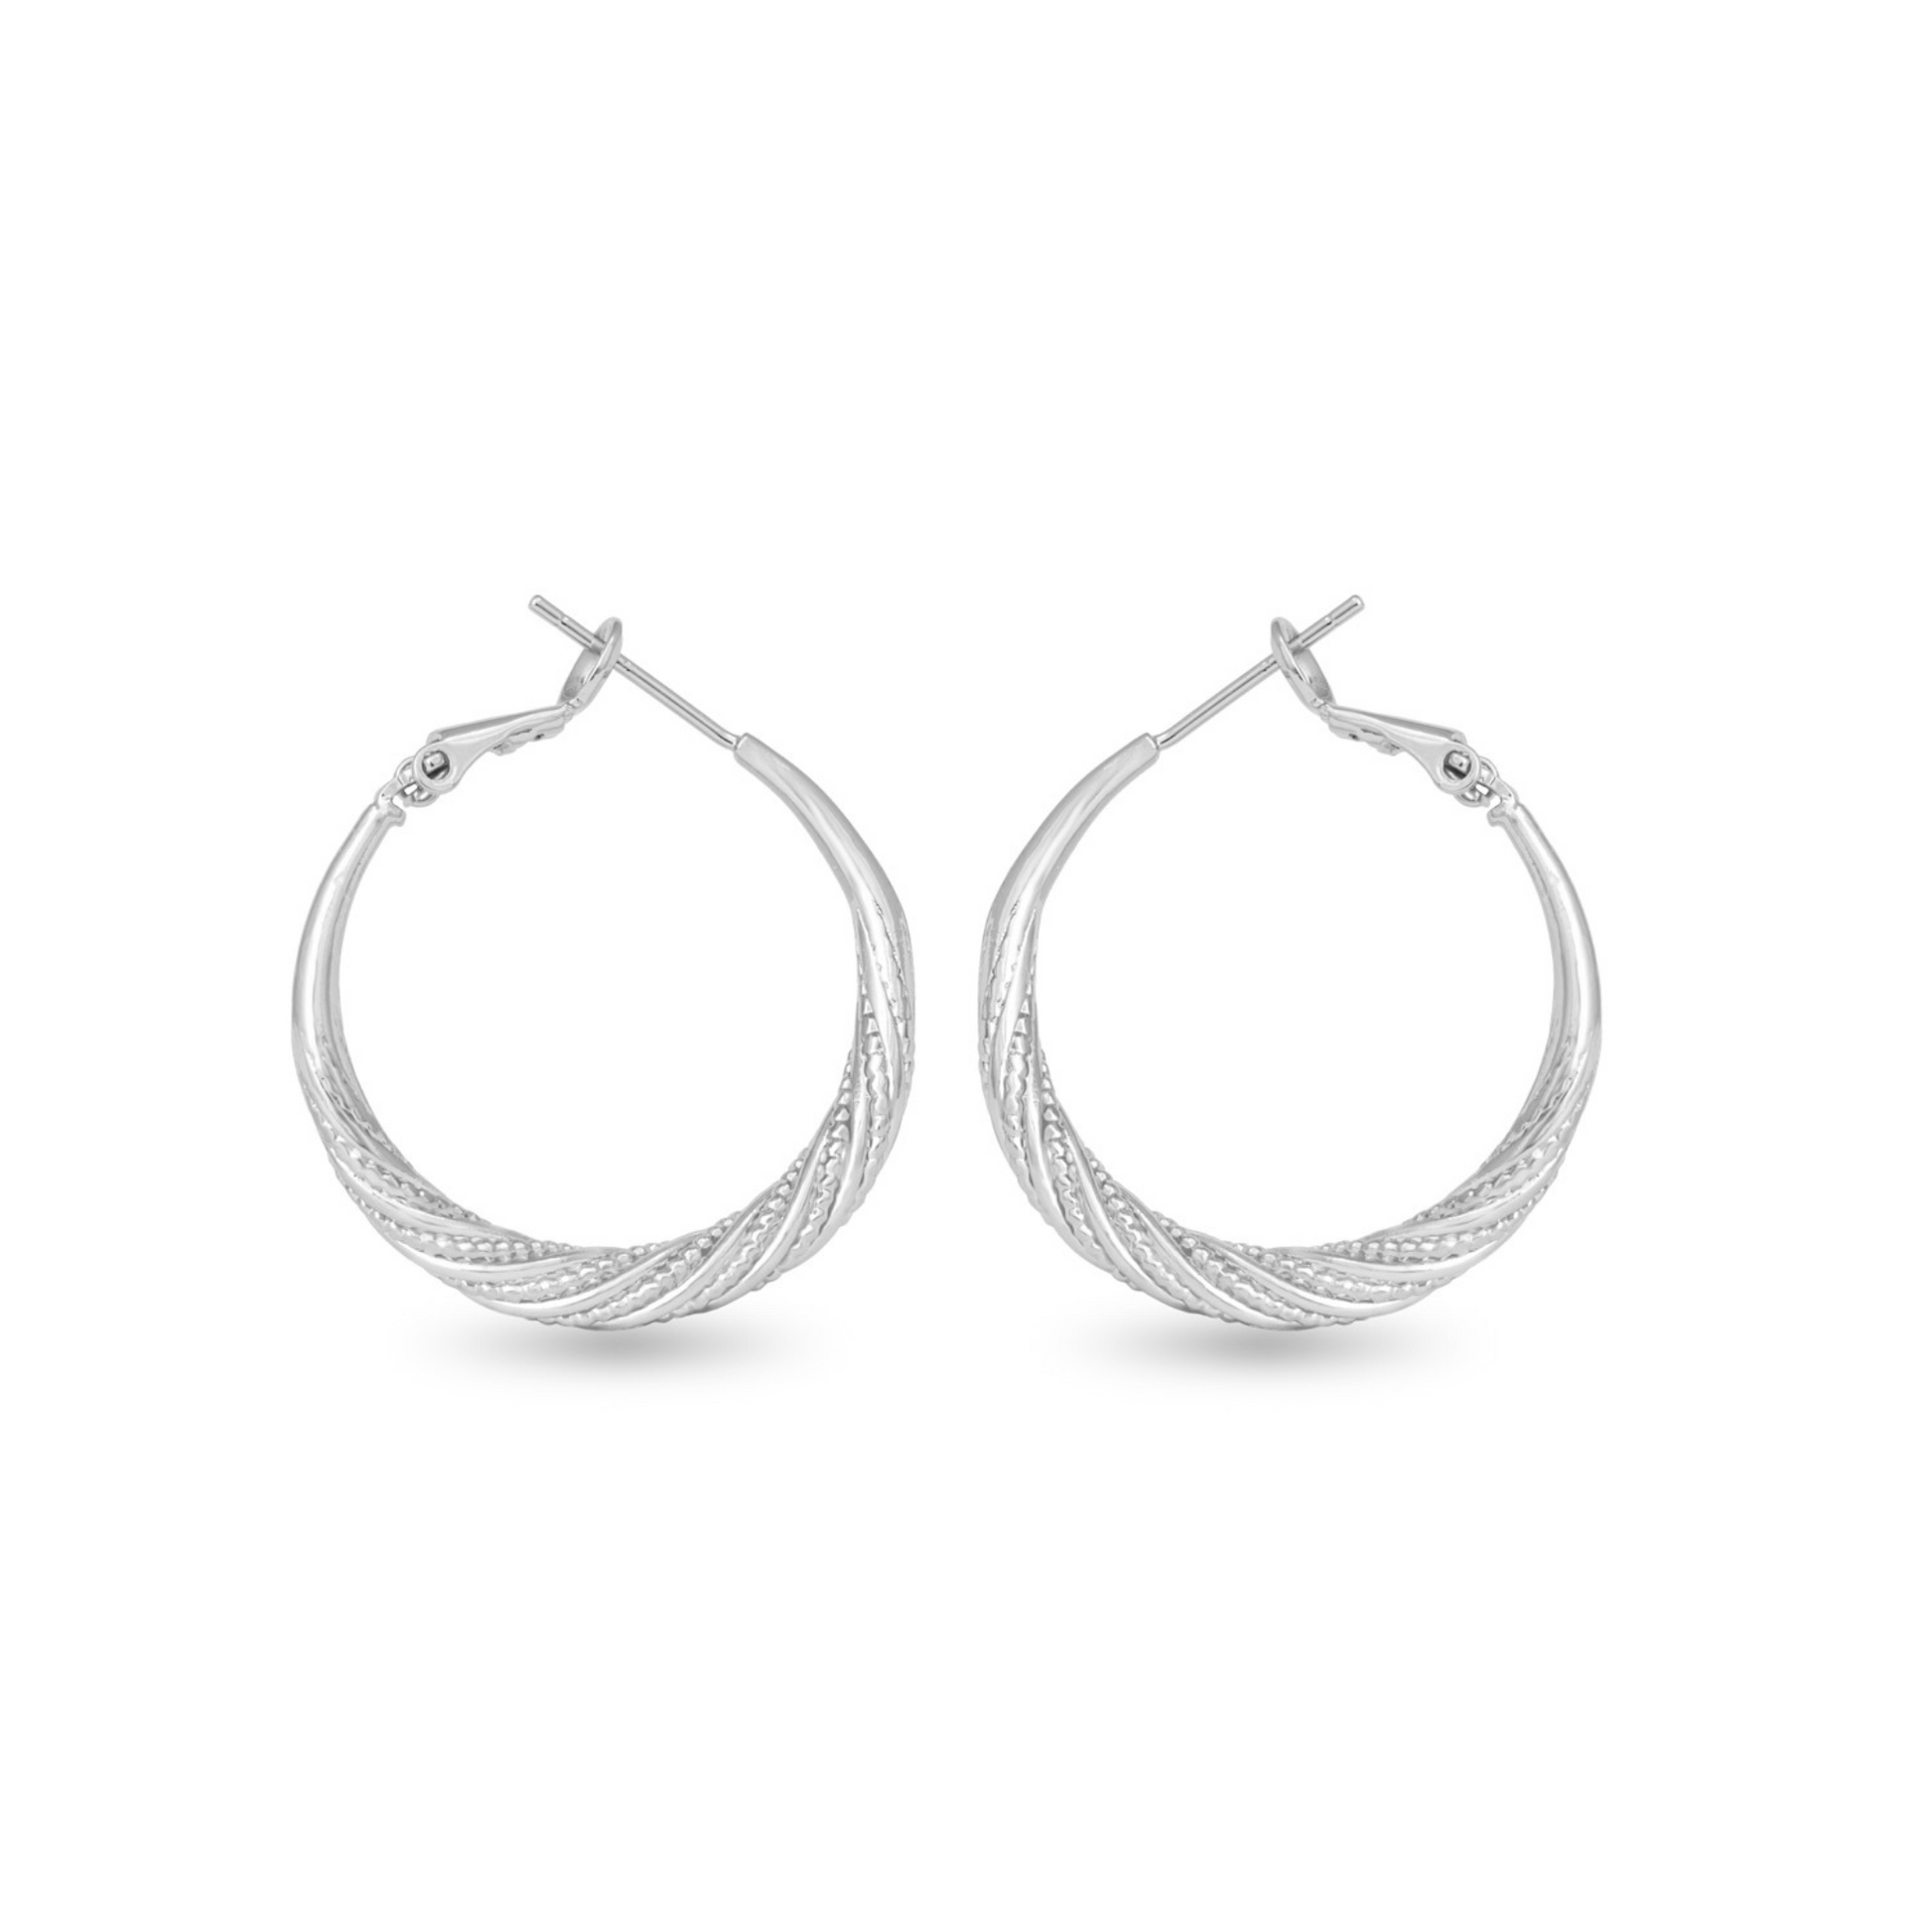 Expertly crafted with silver, these Ivy Twisted Hoops are a must-have accessory. The small hoops feature a unique twisted design that adds texture and dimension, making them perfect for any occasion. Elevate your style with these timeless and versatile earrings.